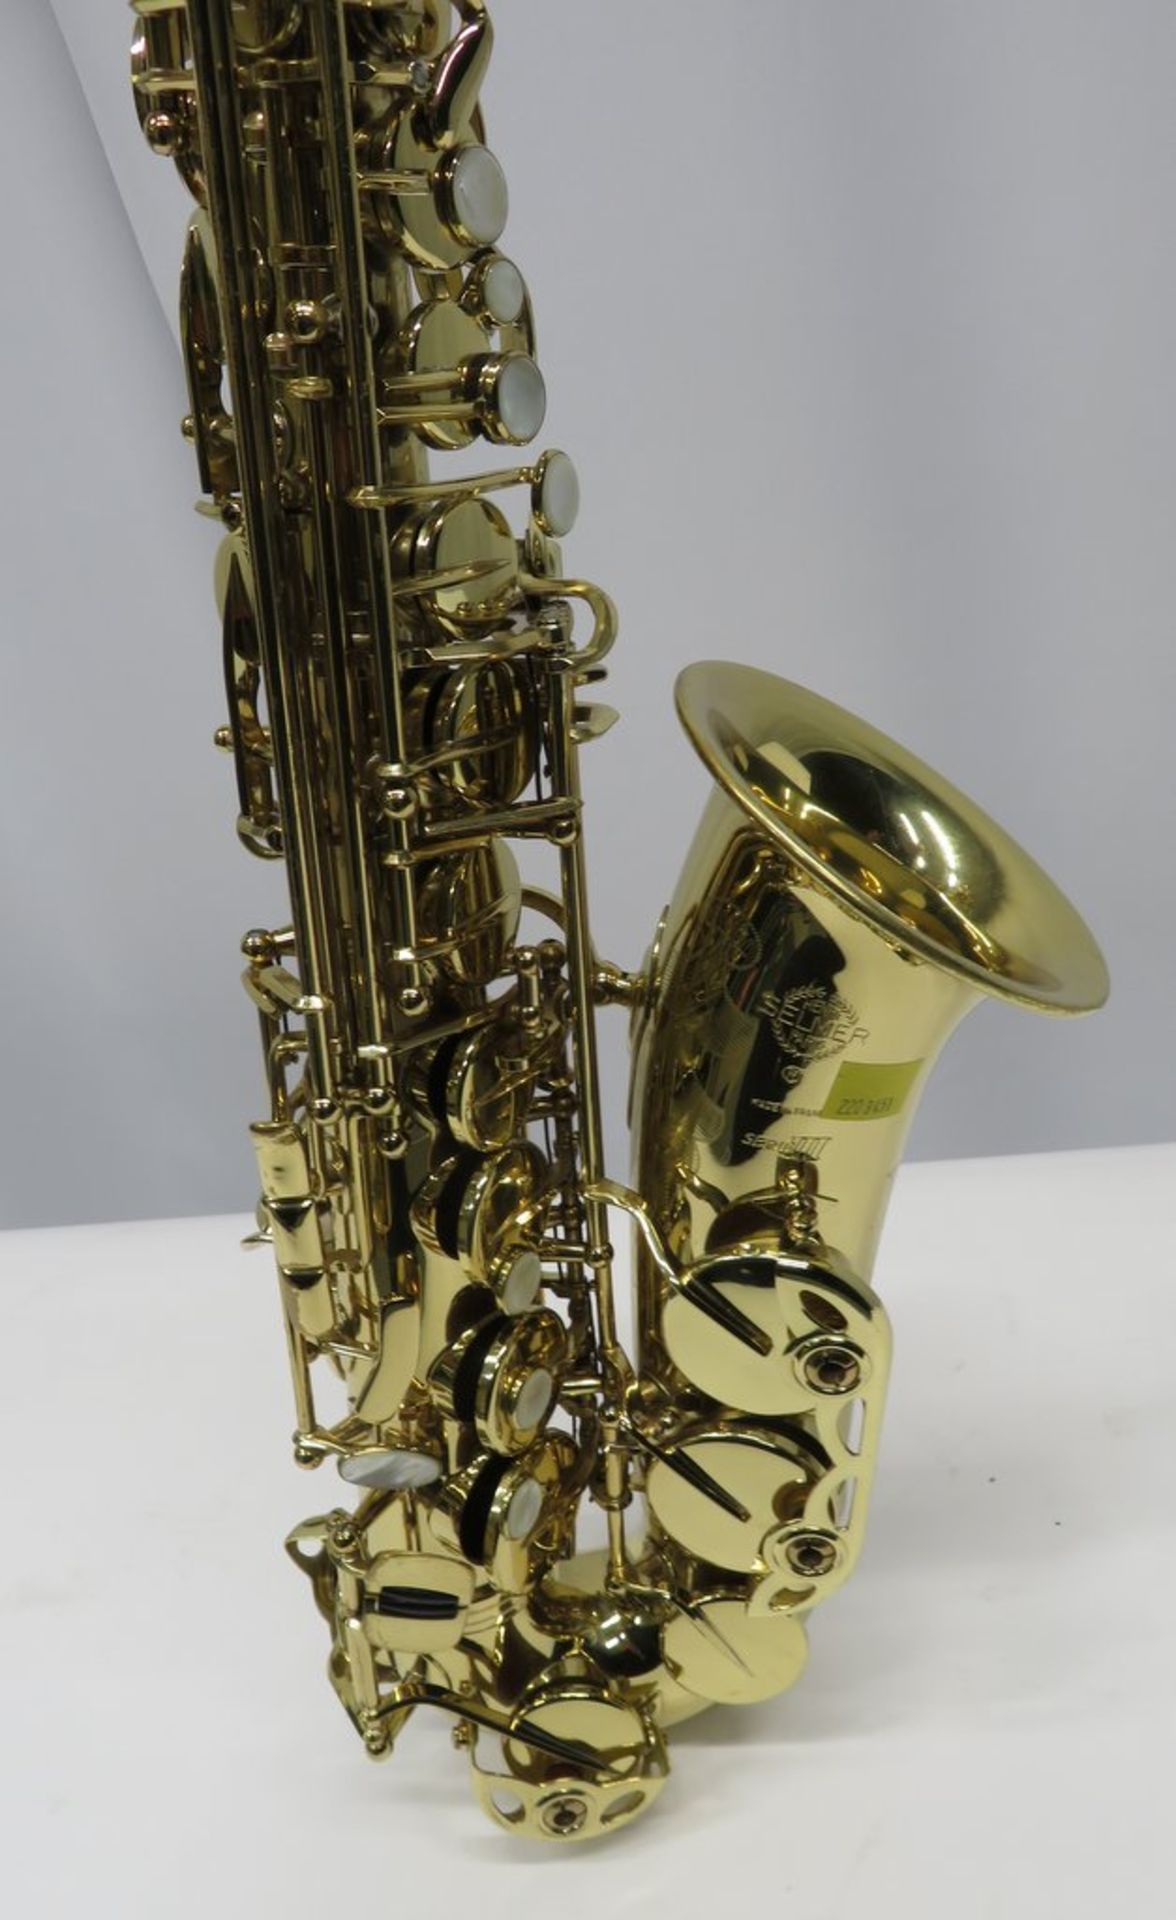 Henri Selmer Super Action 80 Series 3 tenor saxophone with case. Serial number: N.733160. - Image 5 of 14